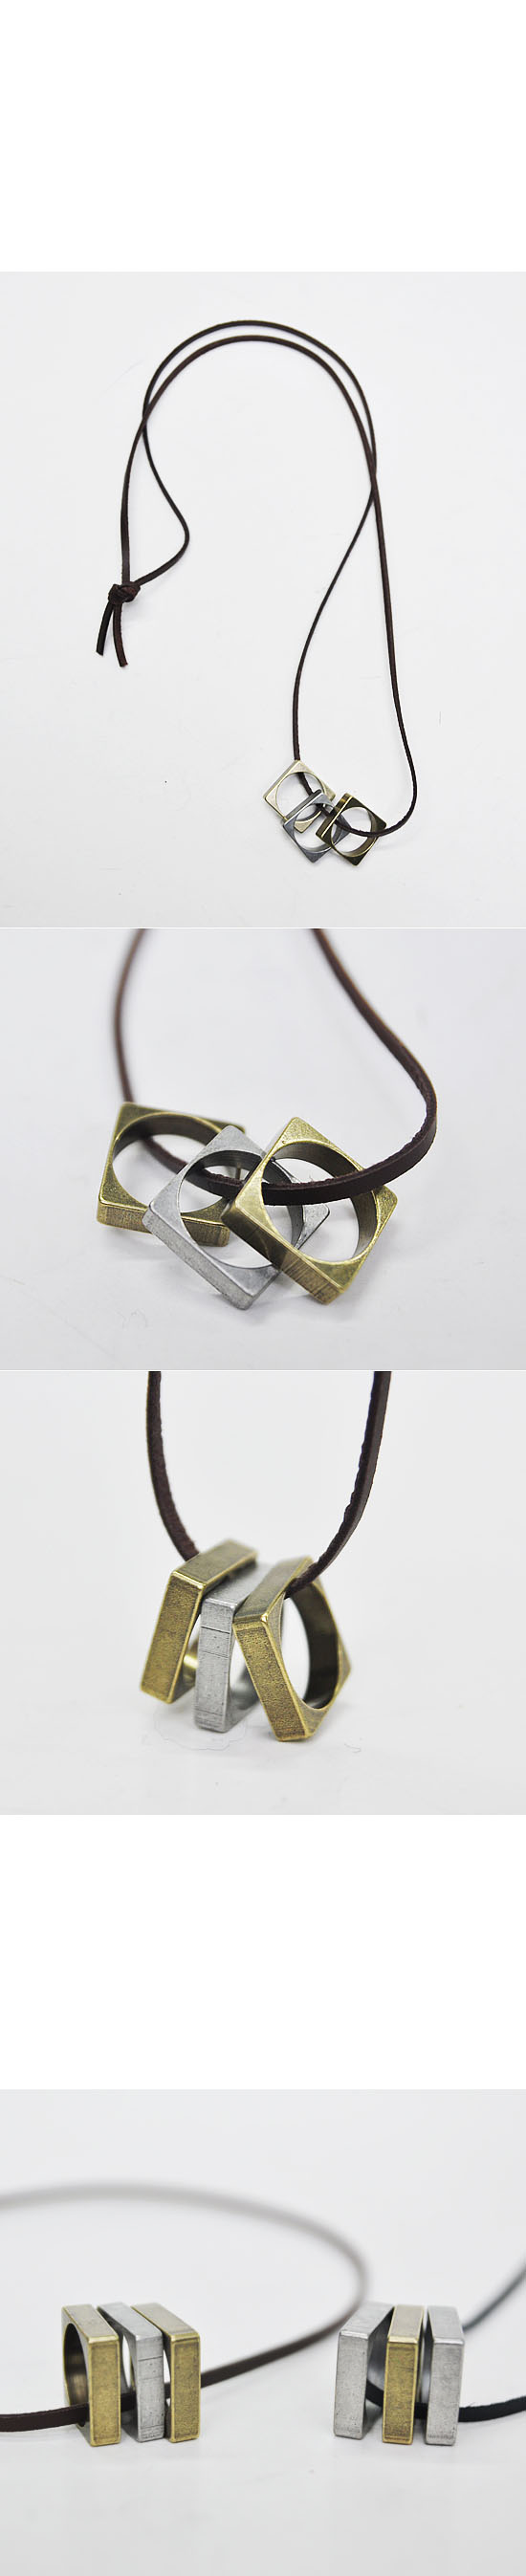 Accessories :: Necklaces :: Triple Square Ring Pendant Leather-Necklace 115